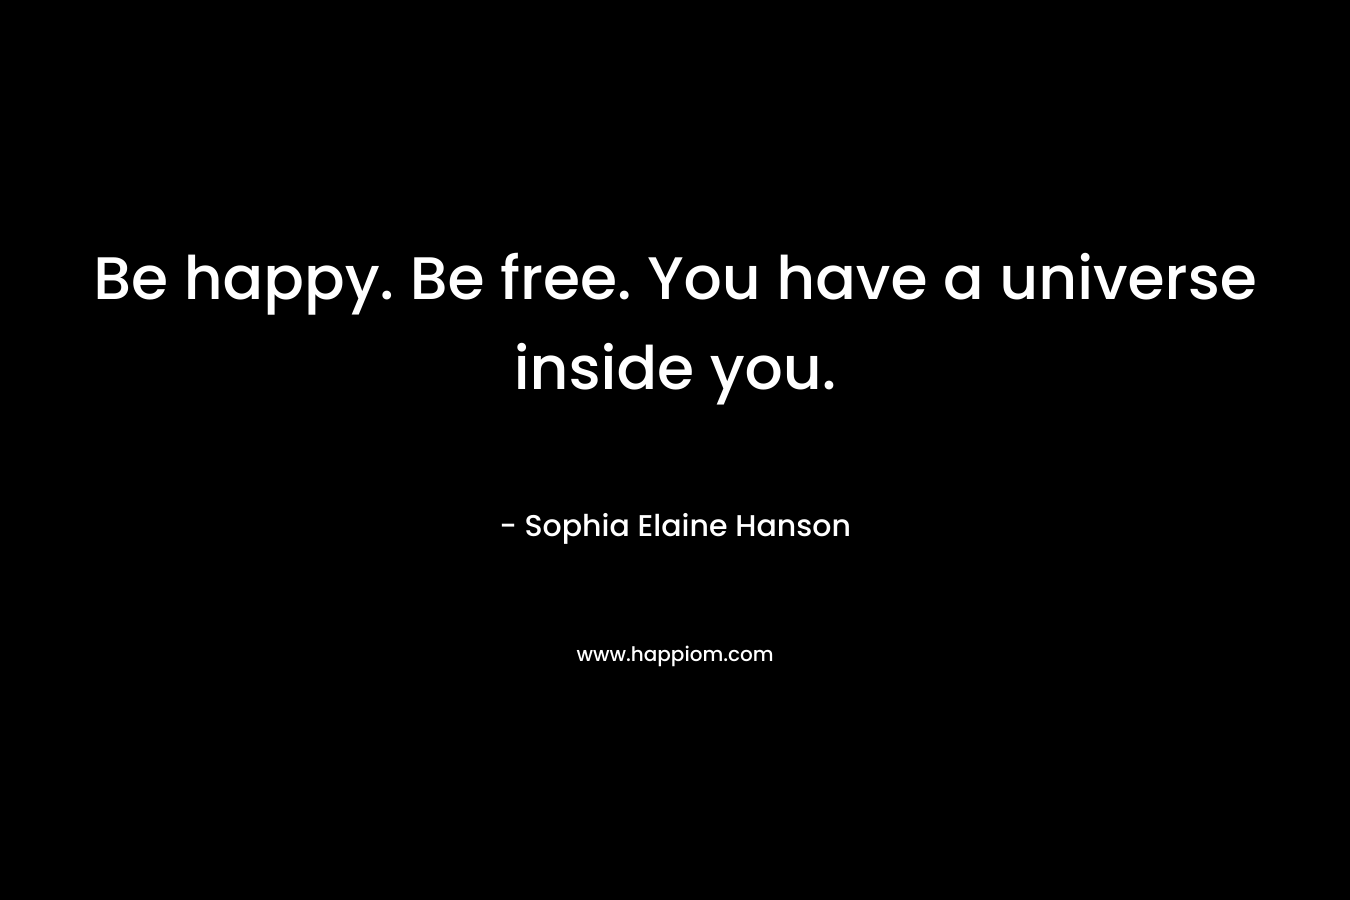 Be happy. Be free. You have a universe inside you.